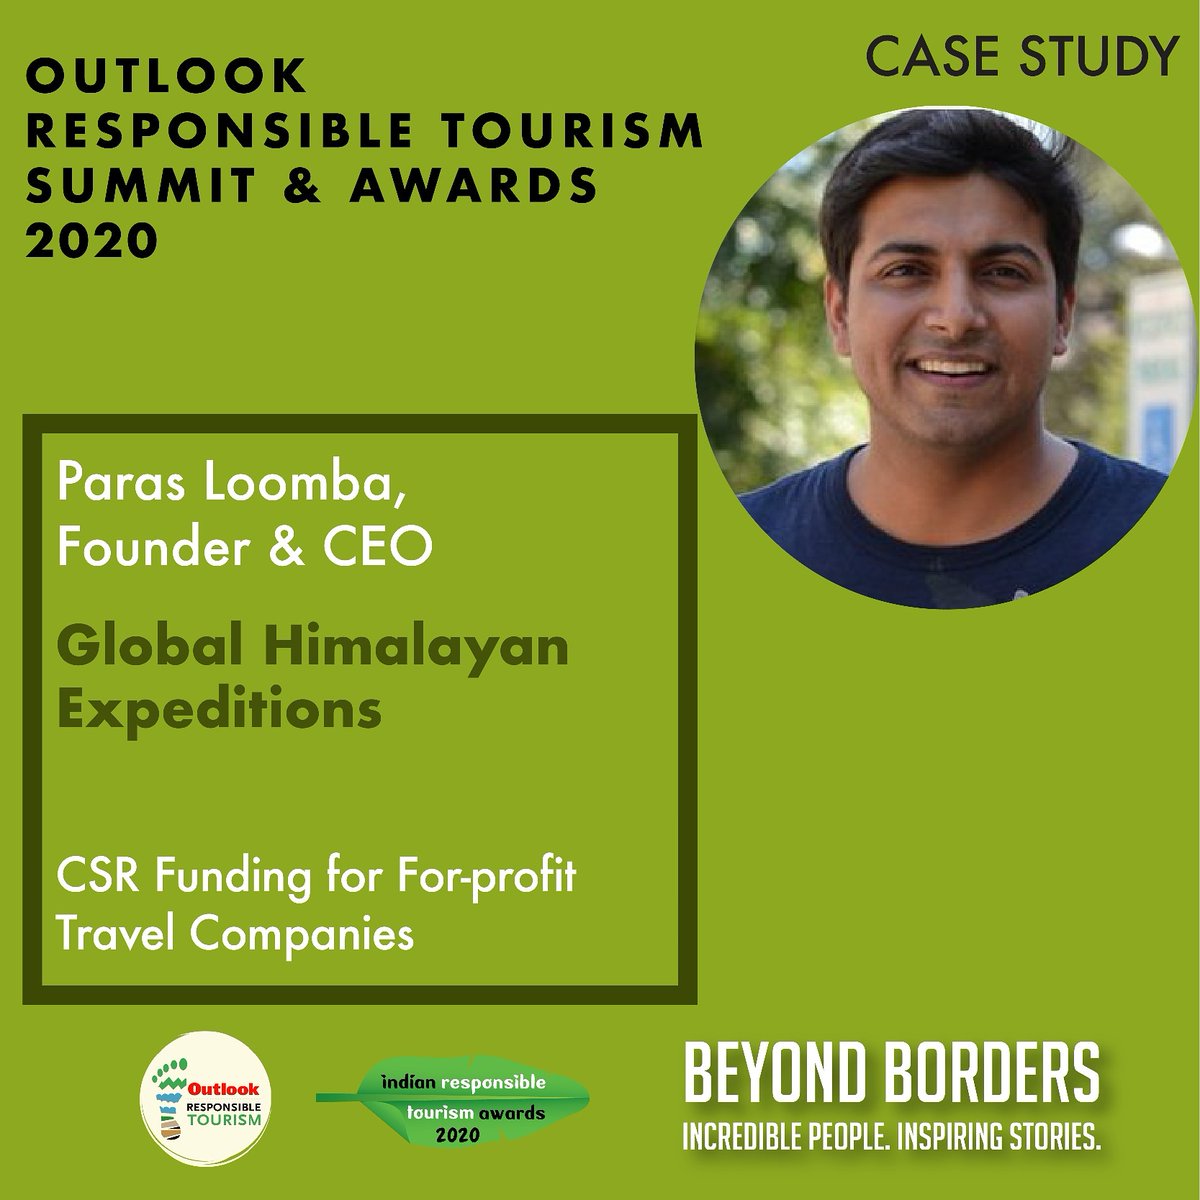 Paras Loomba, Founder and CEO of GHE, will be sharing his experience of raising CSR funding. 

Date: 17th January 2020
Venue: Taj Mahal Hotel, New Delhi

#IRTA2020 #CSRfunds #casestudy #travelstartup